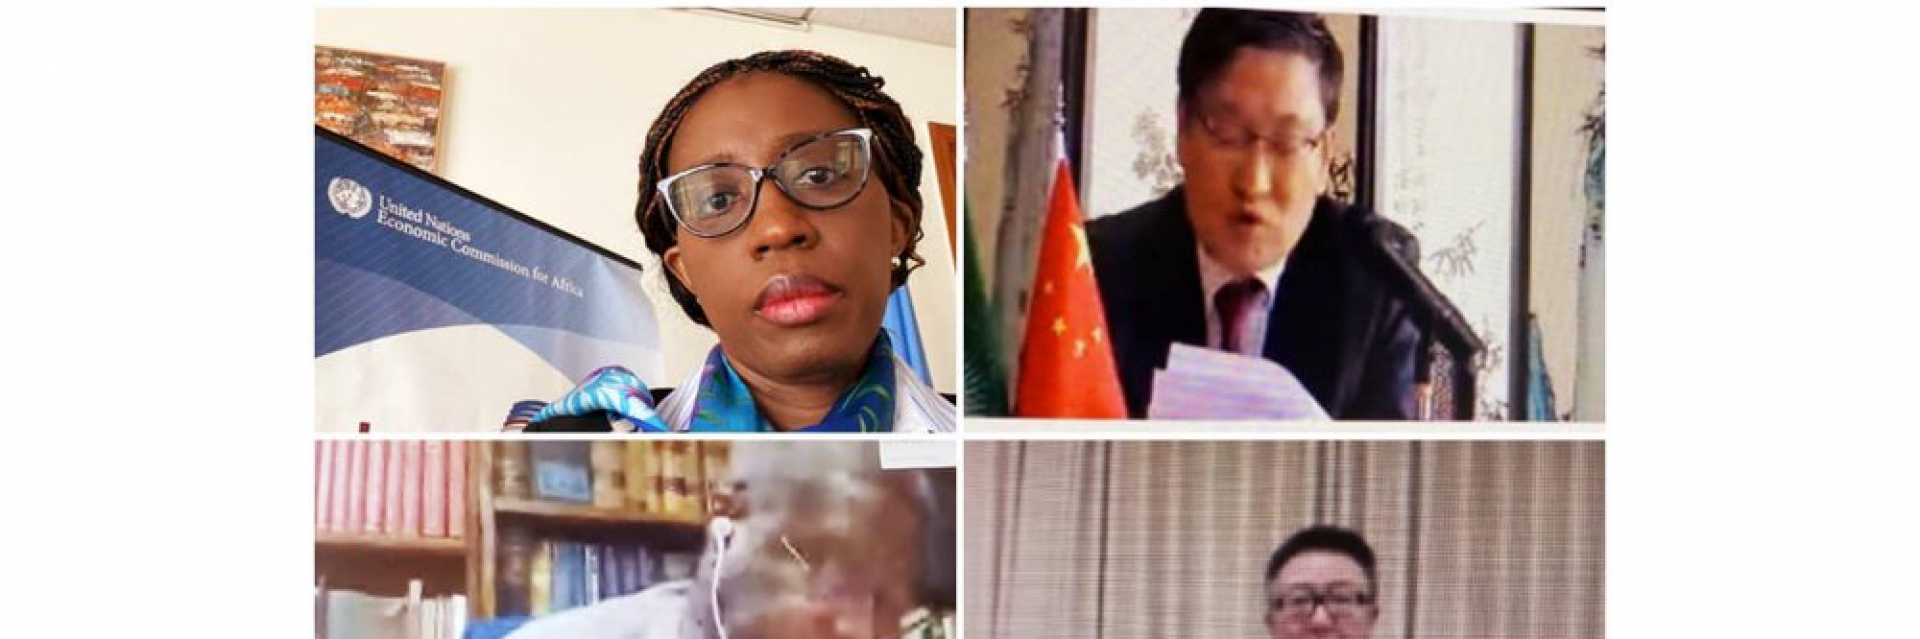 Vera Songwe urges China to participate in the G20 Debt Service Suspension Initiative in support of Africa’s liquidity needs